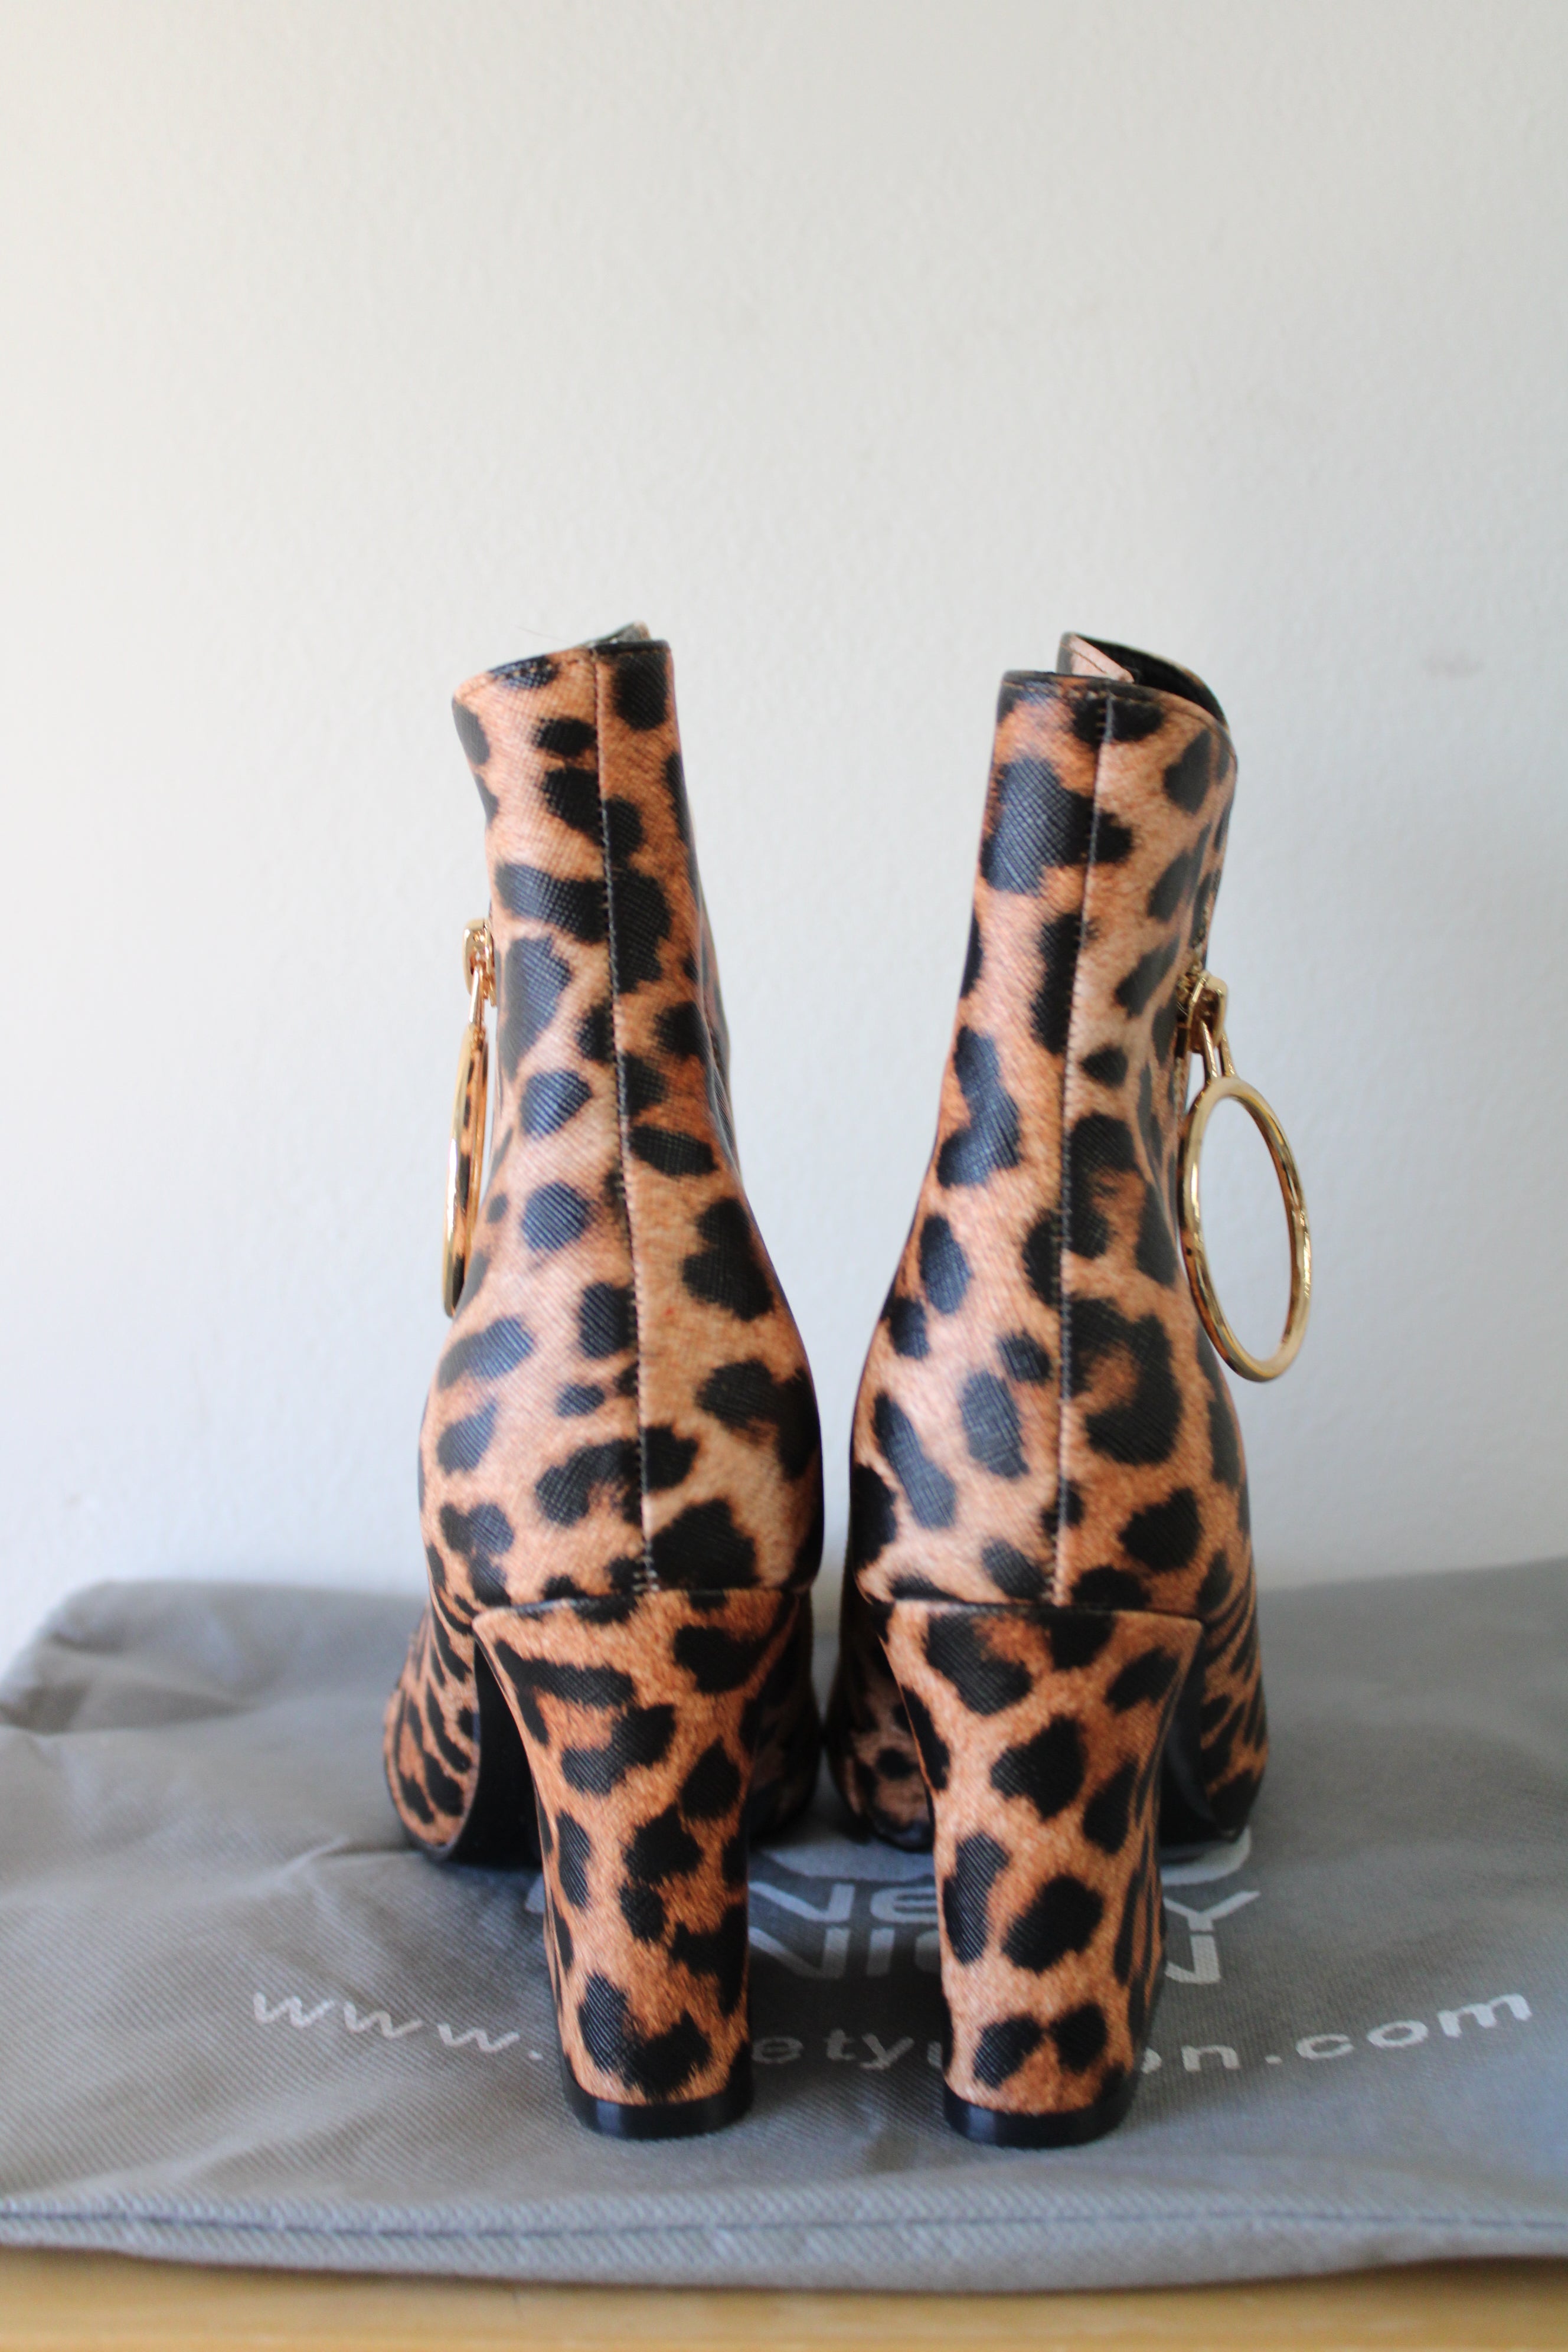 NEW Ninety Union Classic-Leo Bootie Leopard Healed Boots | Size 6